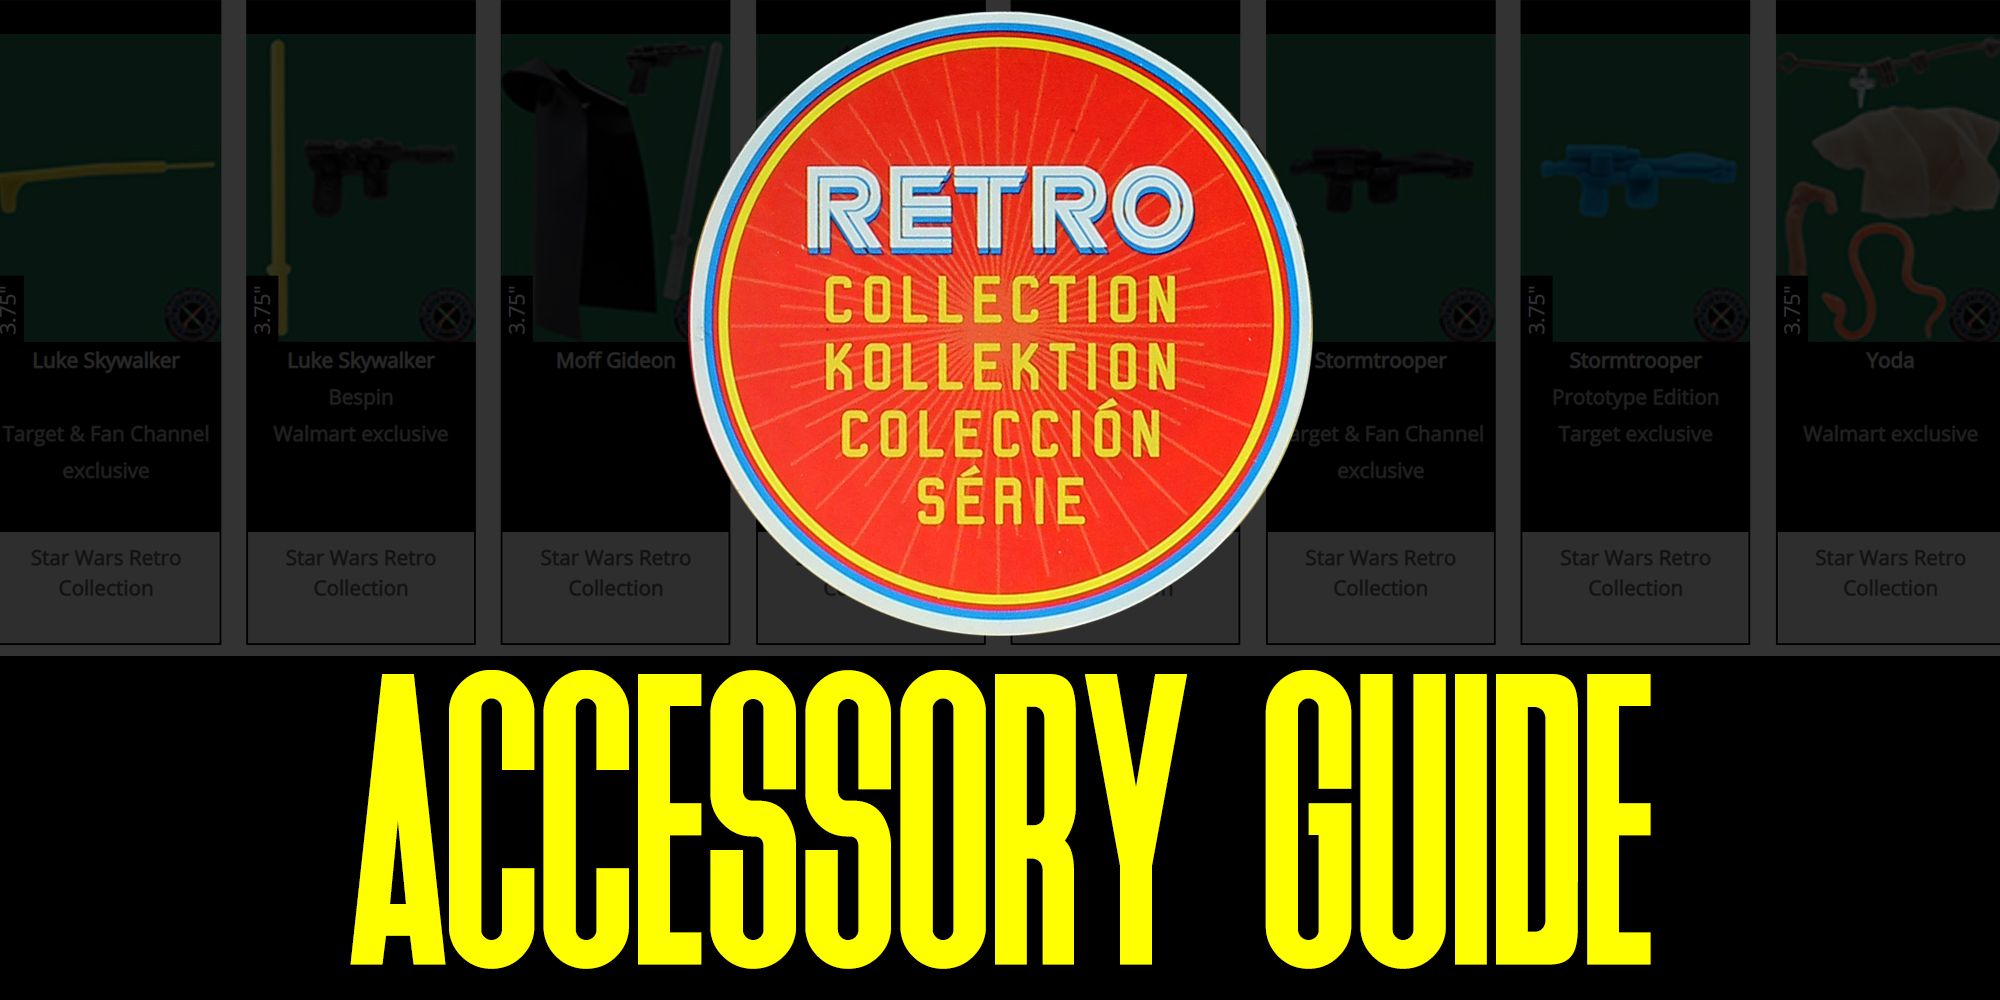 The Retro Collection Accessory Guide Is Here!